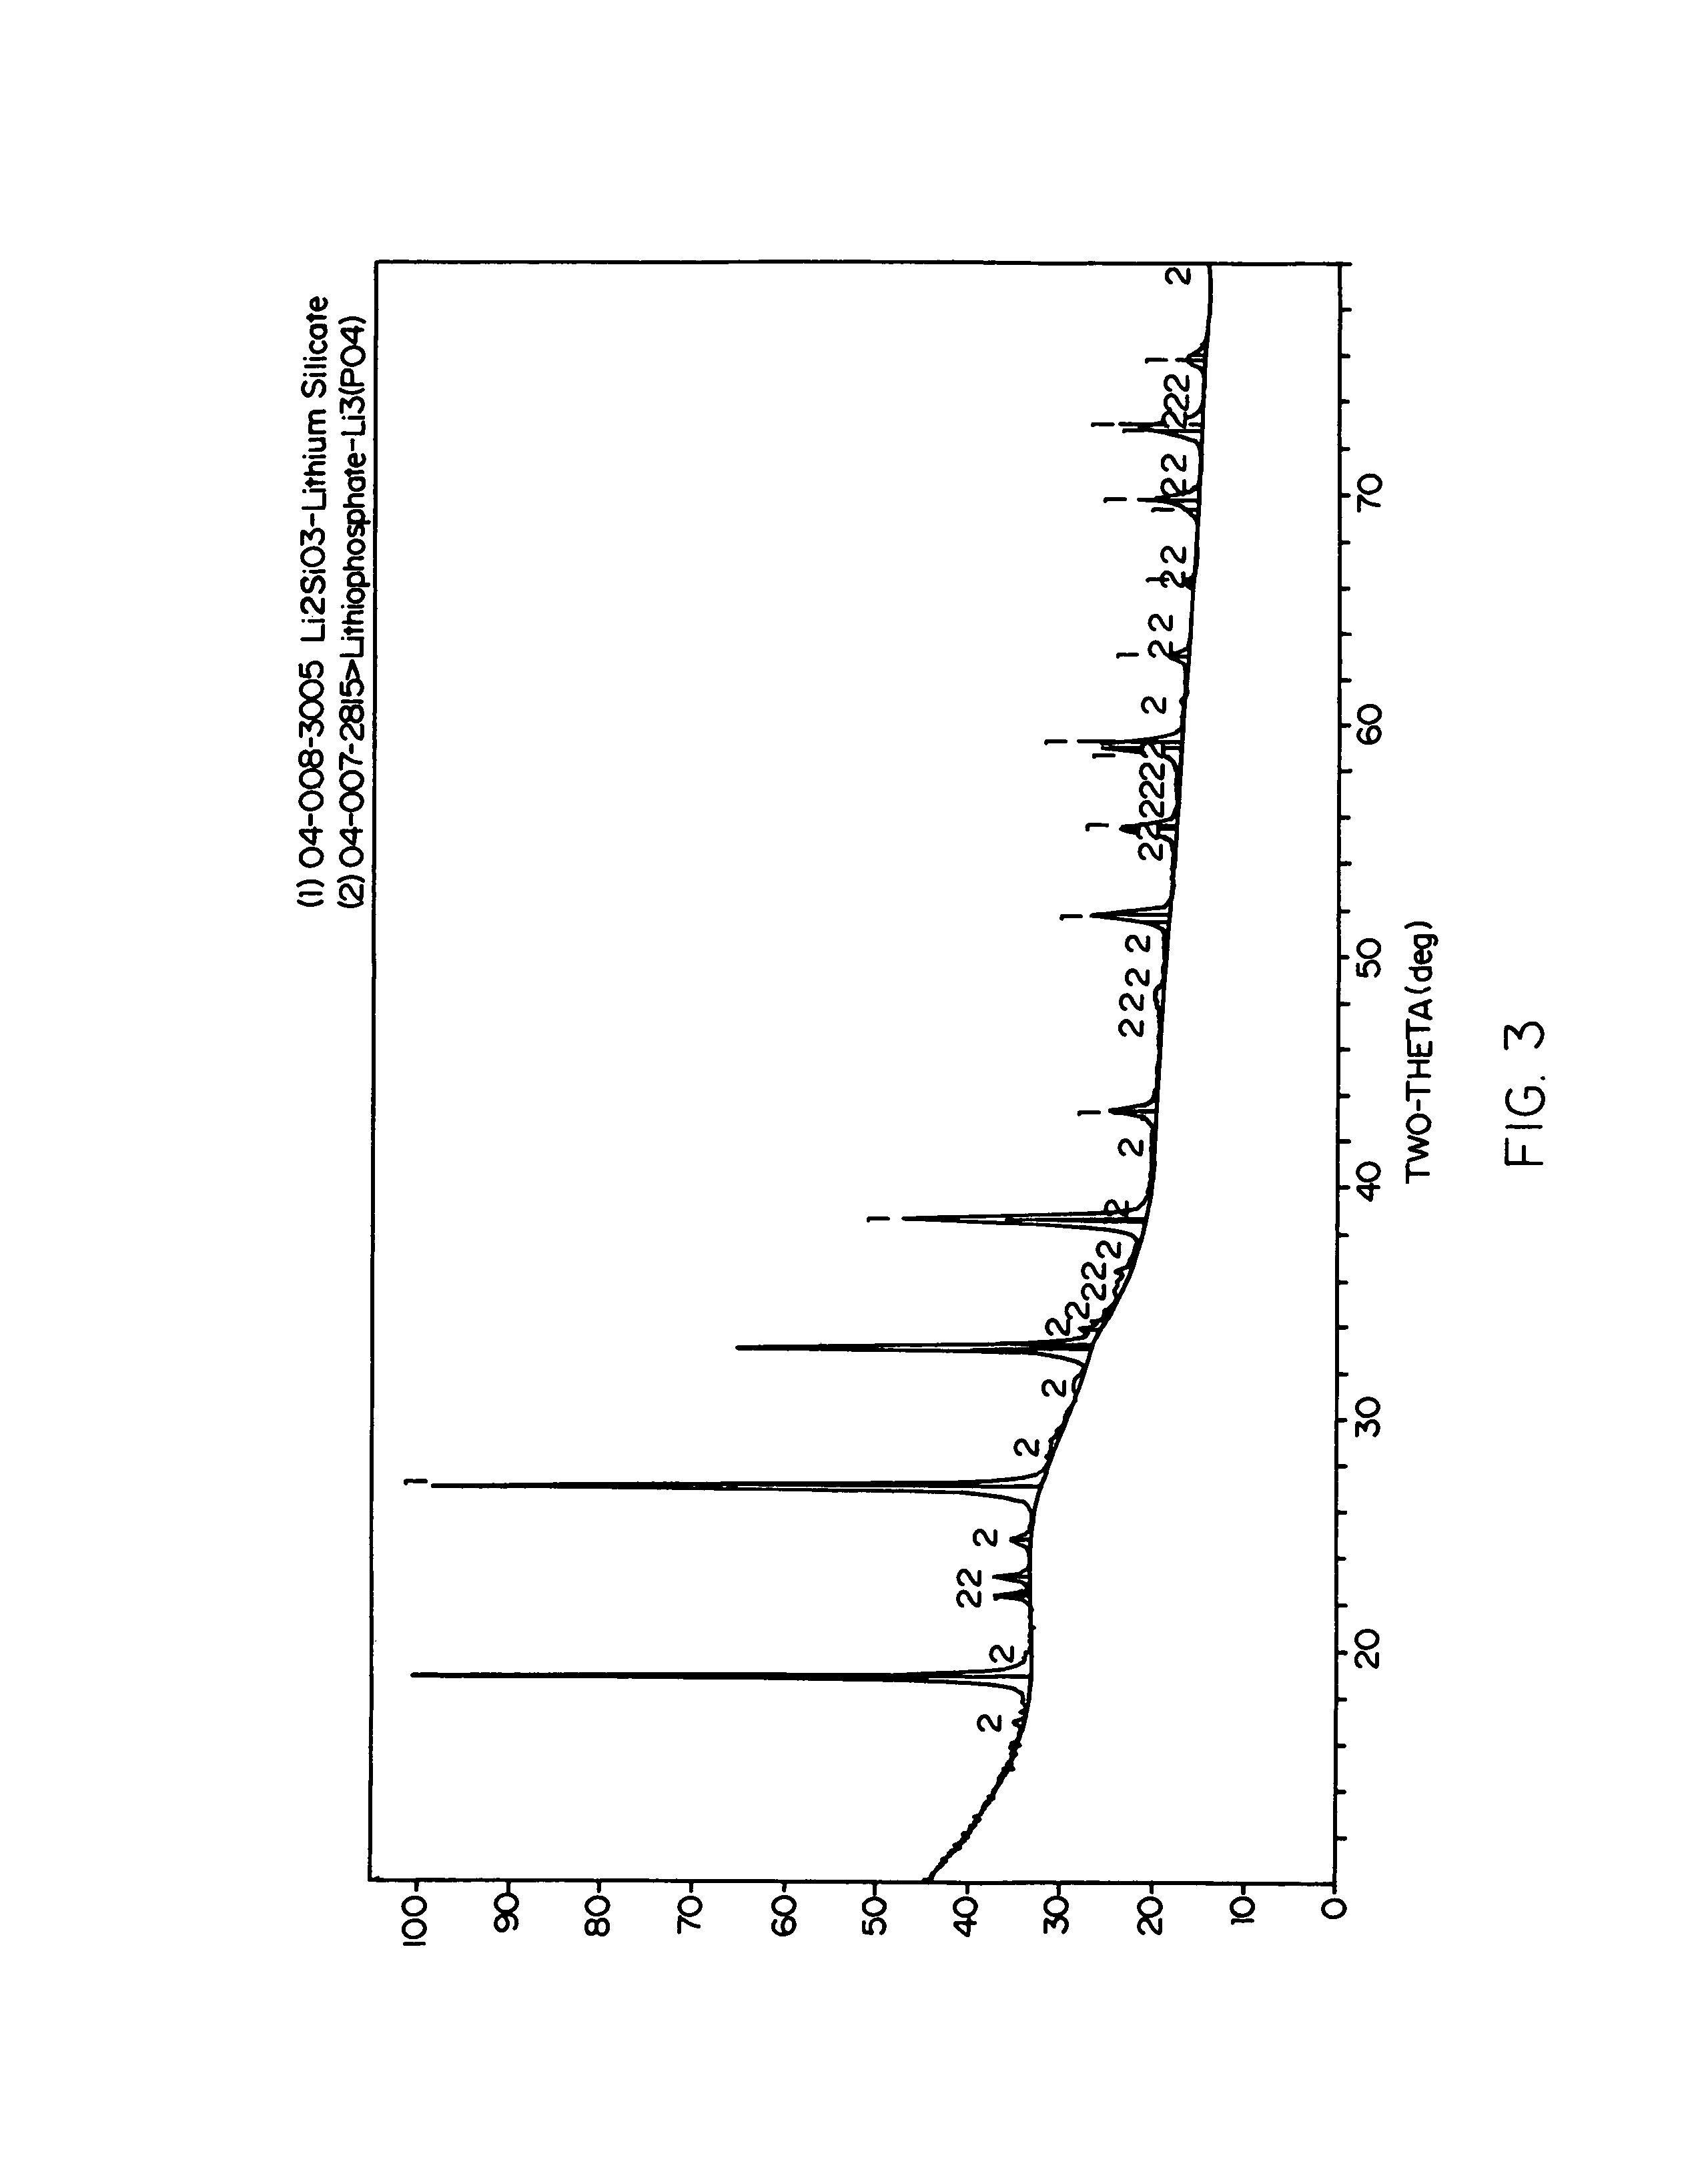 Lithium silicate glass ceramic for fabrication of dental appliances